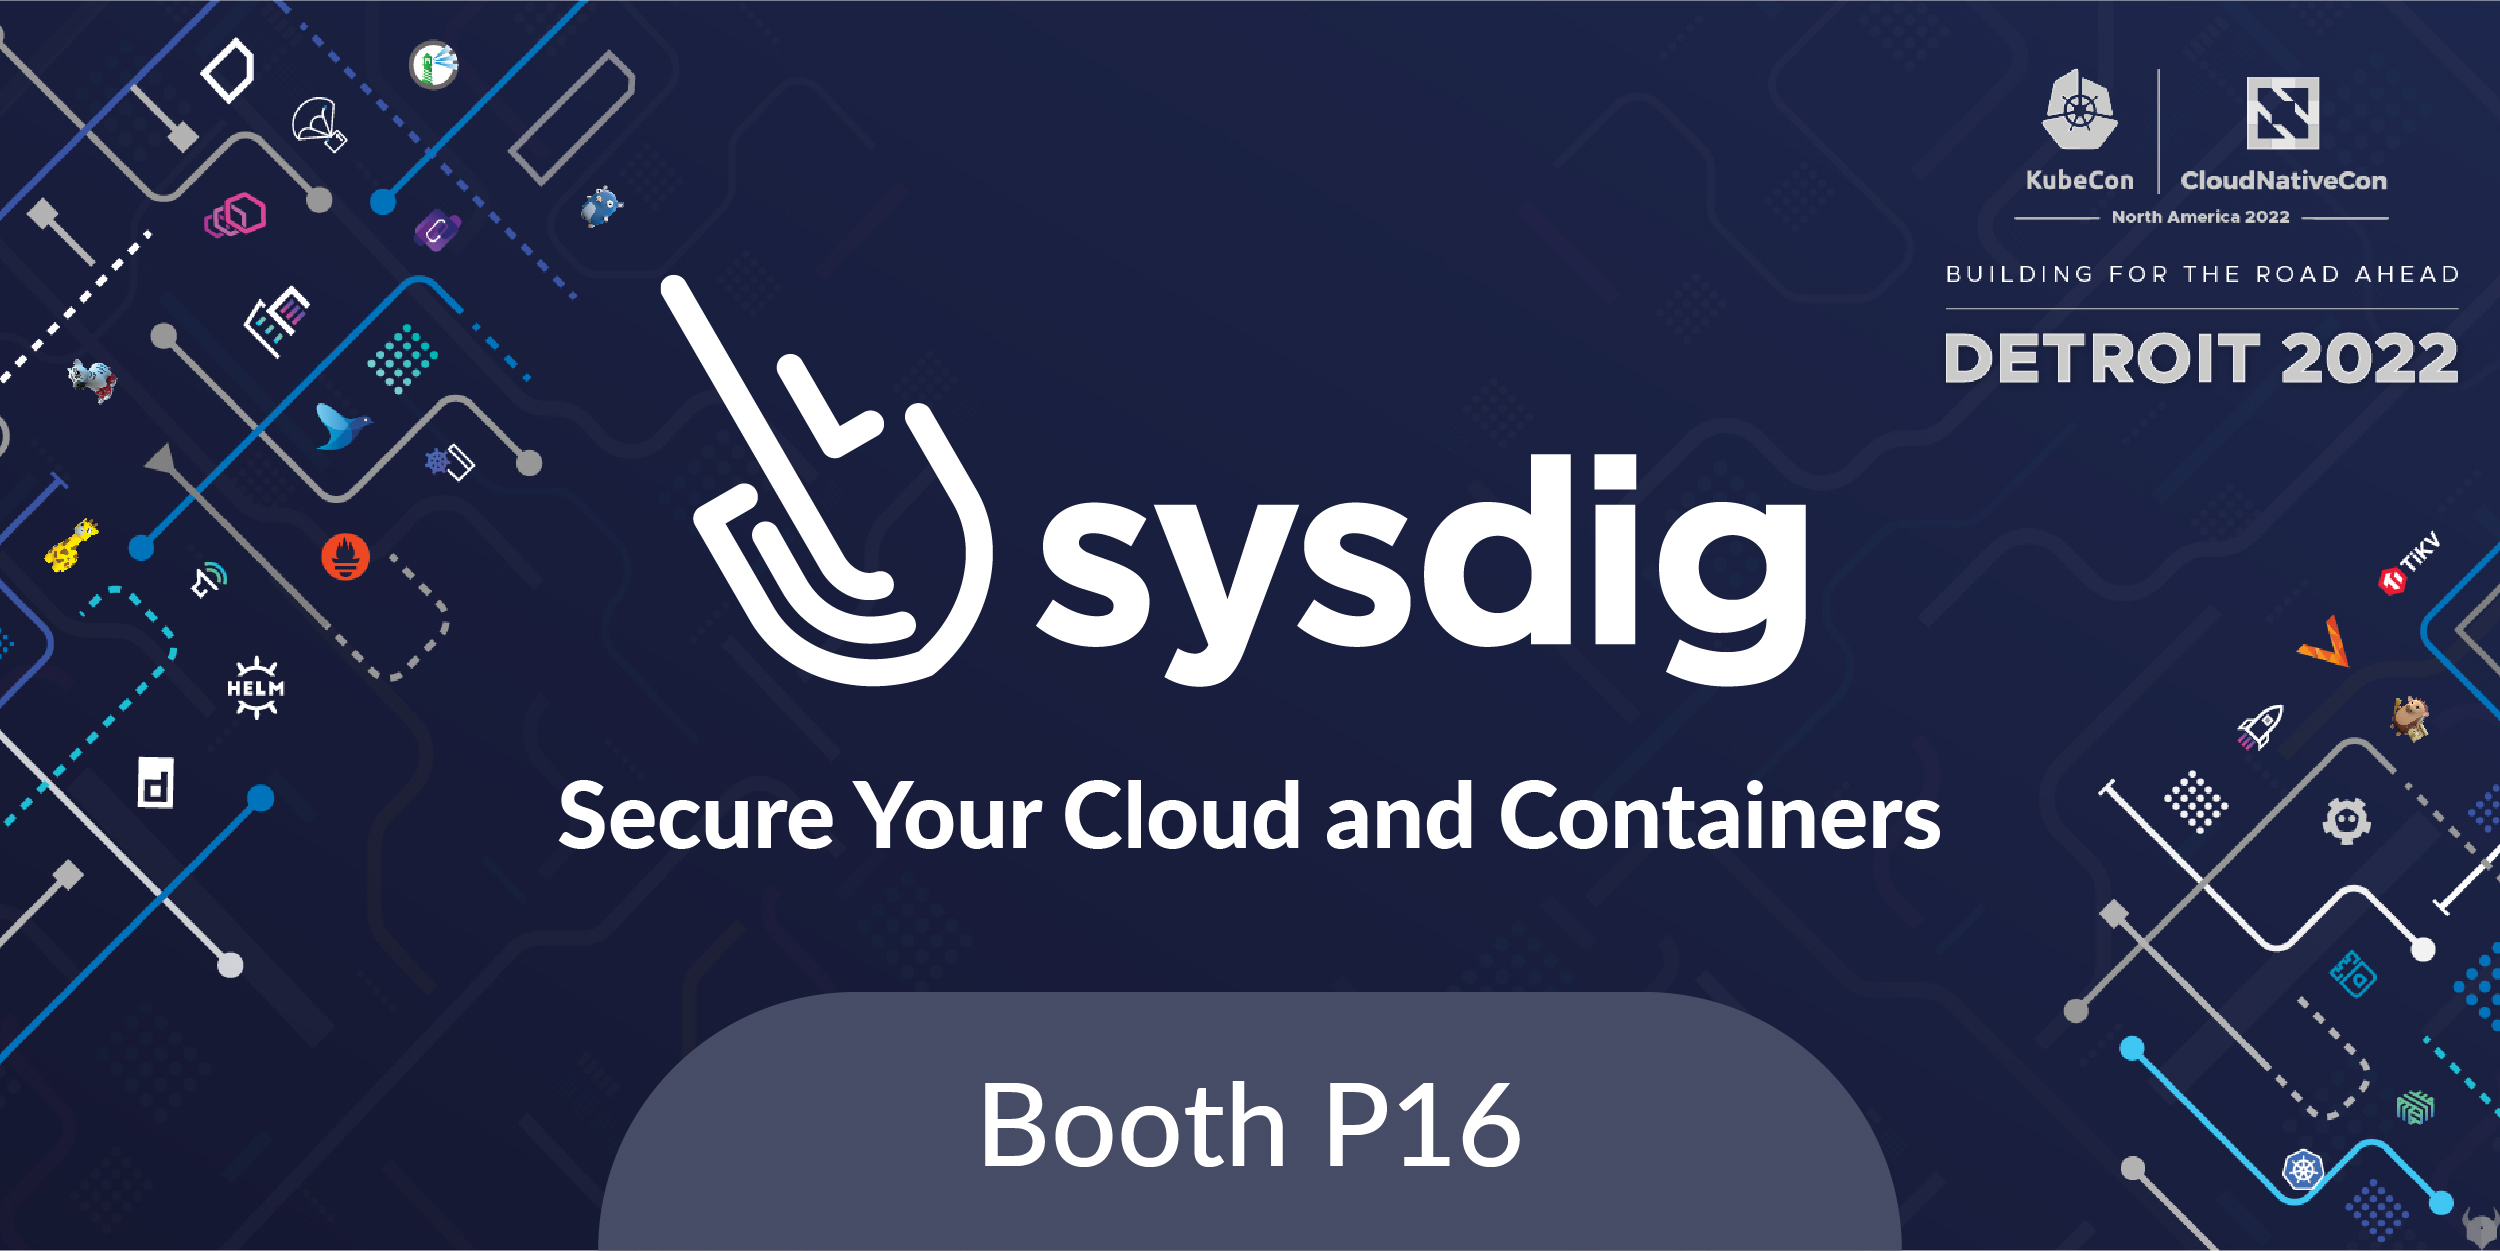 General Participation card for KubeCon 2022: Sysdig booth is Booth P16